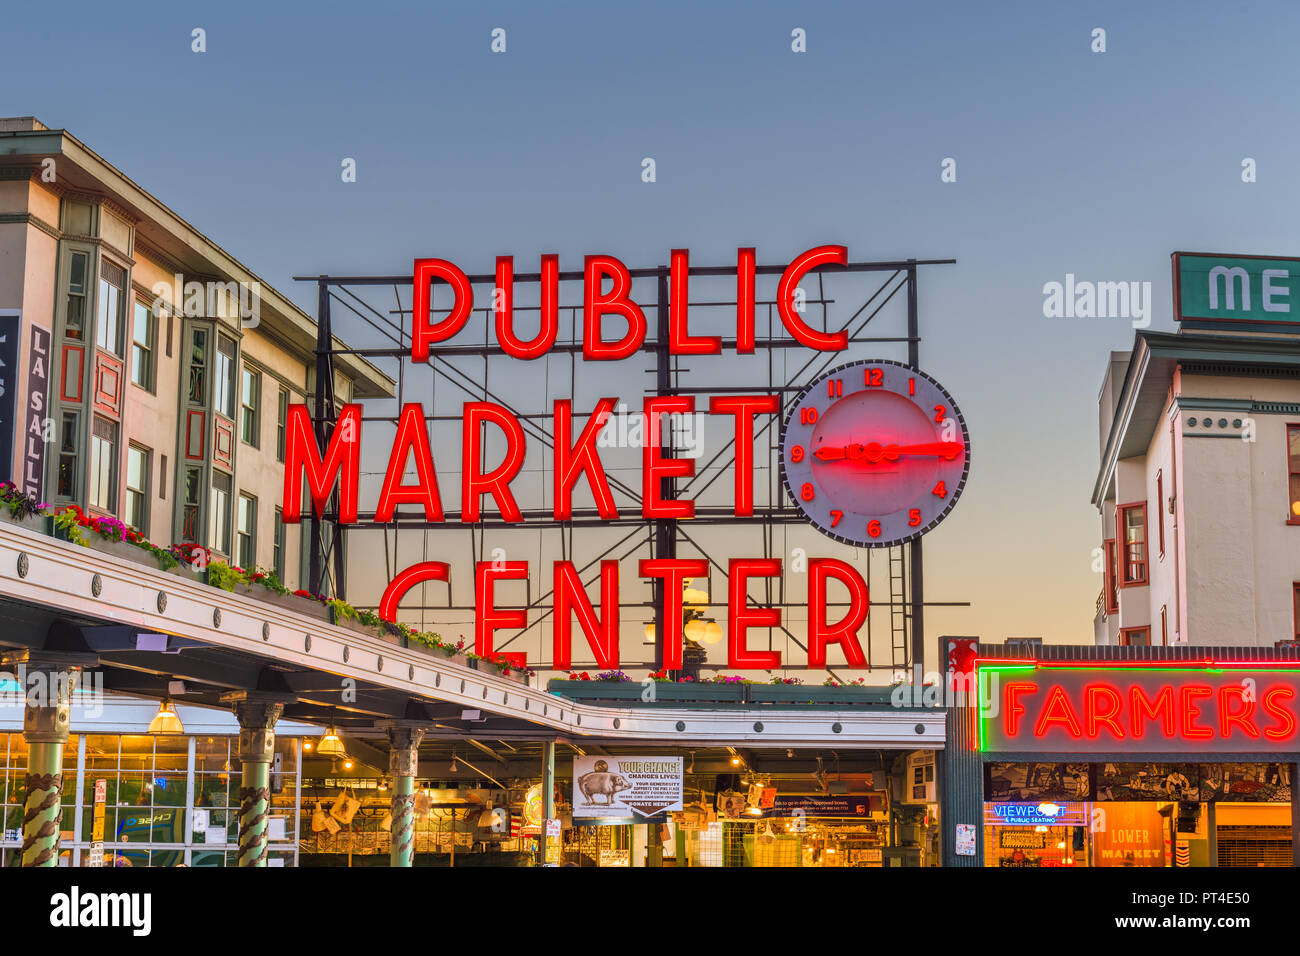 SEATTLE; WASHINGTON - July 2; 2018: Pike Place Market at night. The popular tourist destination opened in 1907 and is one of the oldest continuously o Stock Photo